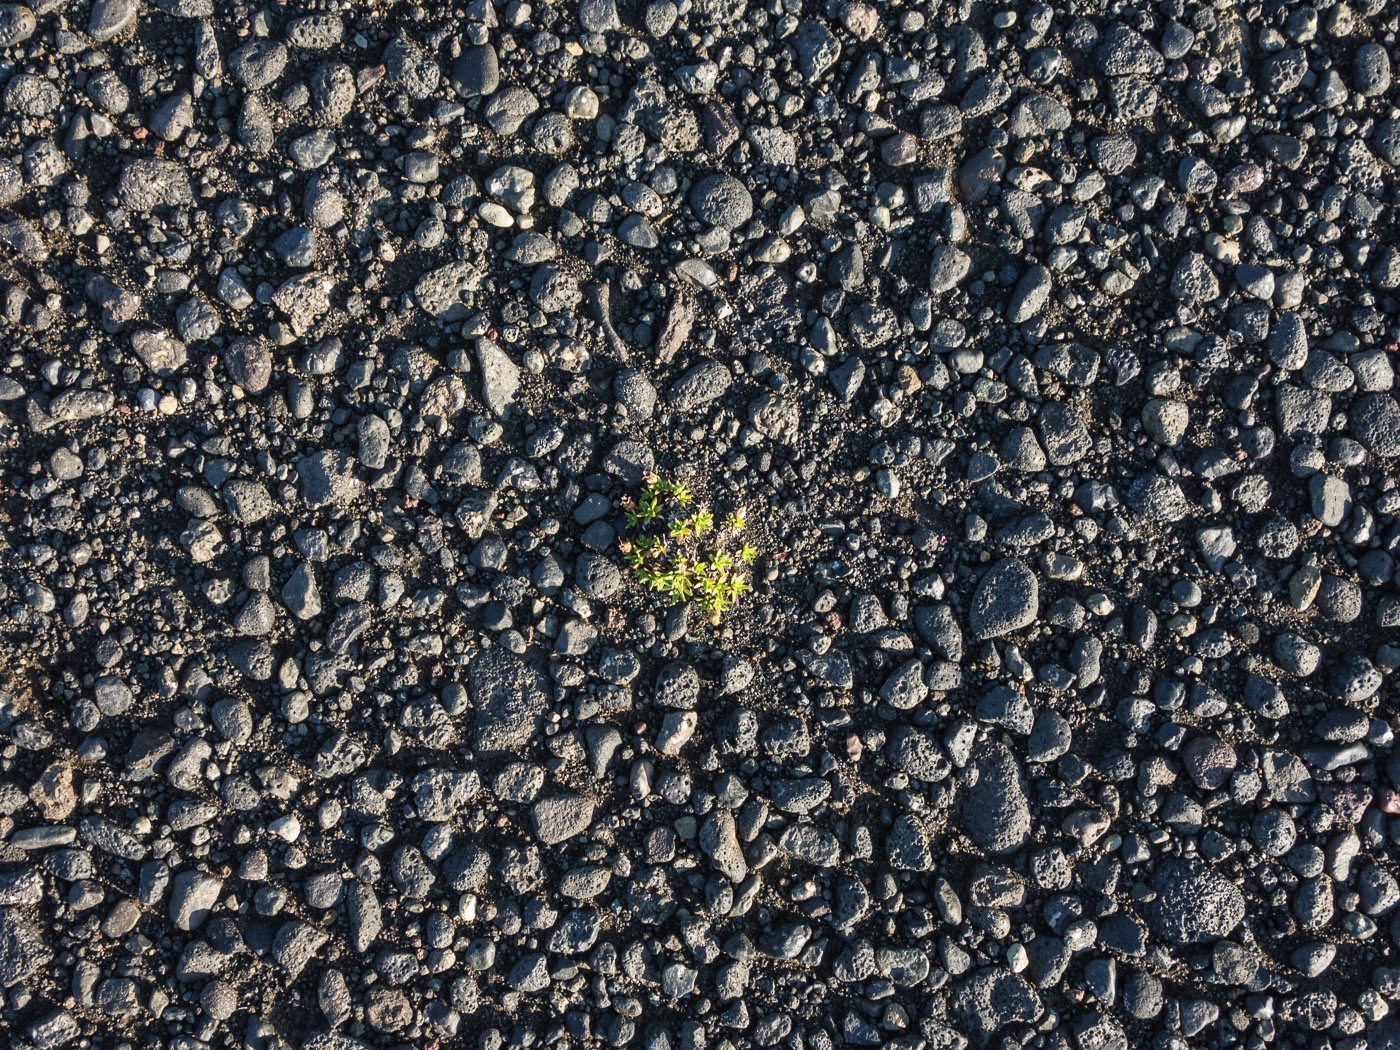 Northern Iceland - Back to Svarfaðardalur. On vacation. - ... and a very few plants (beside road F88). (25 July 2014)